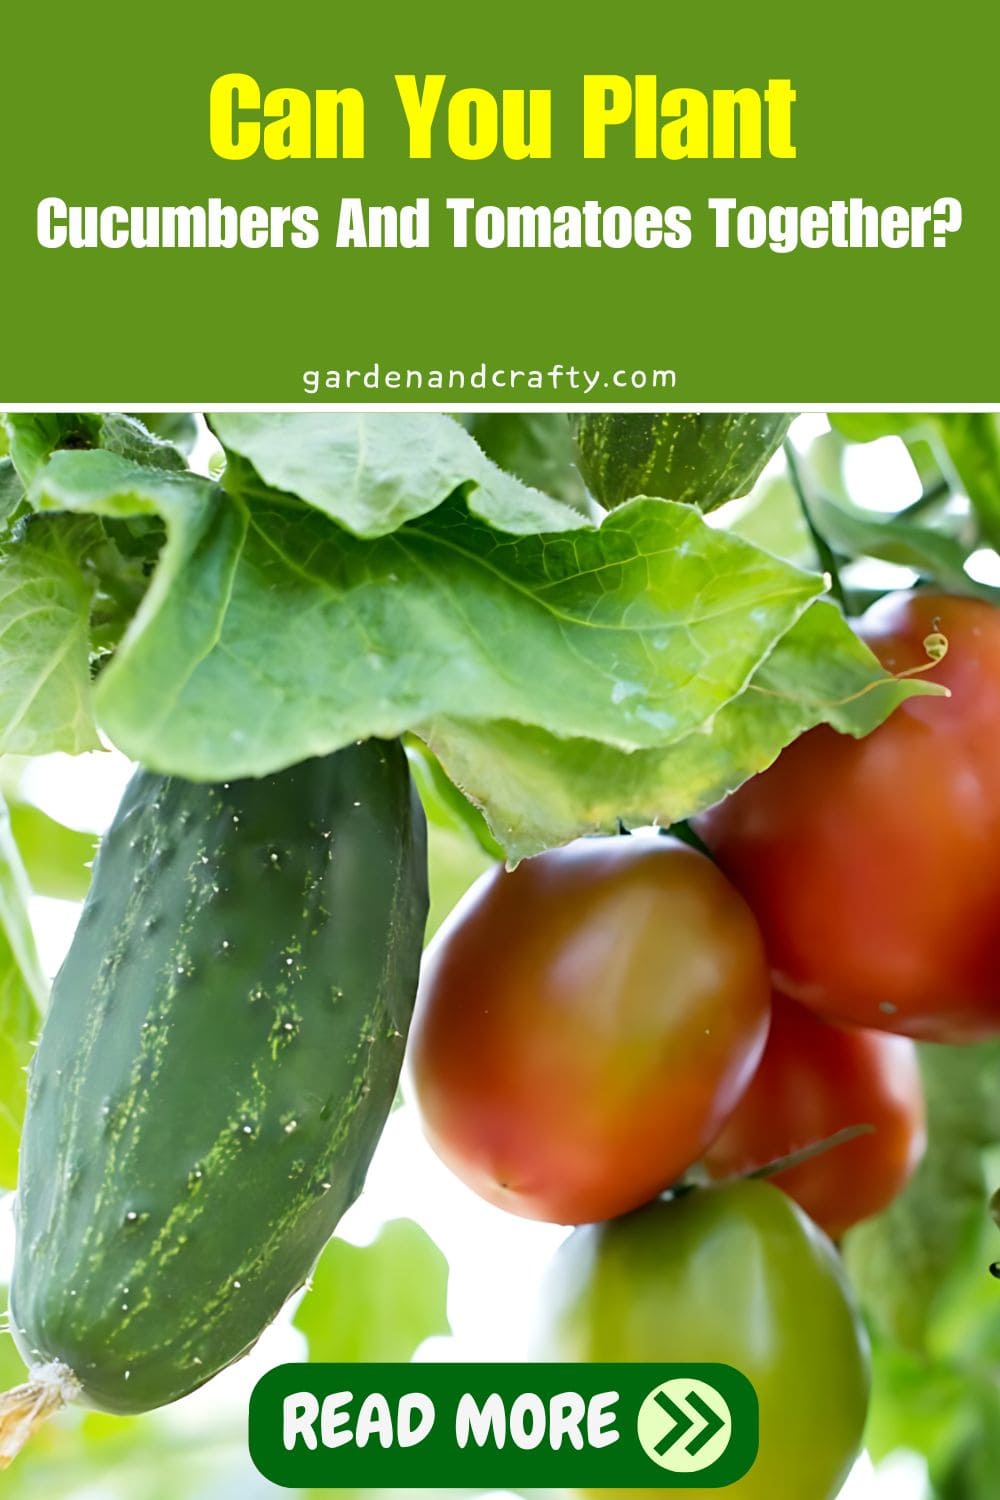 Can You Plant Cucumbers And Tomatoes Together?